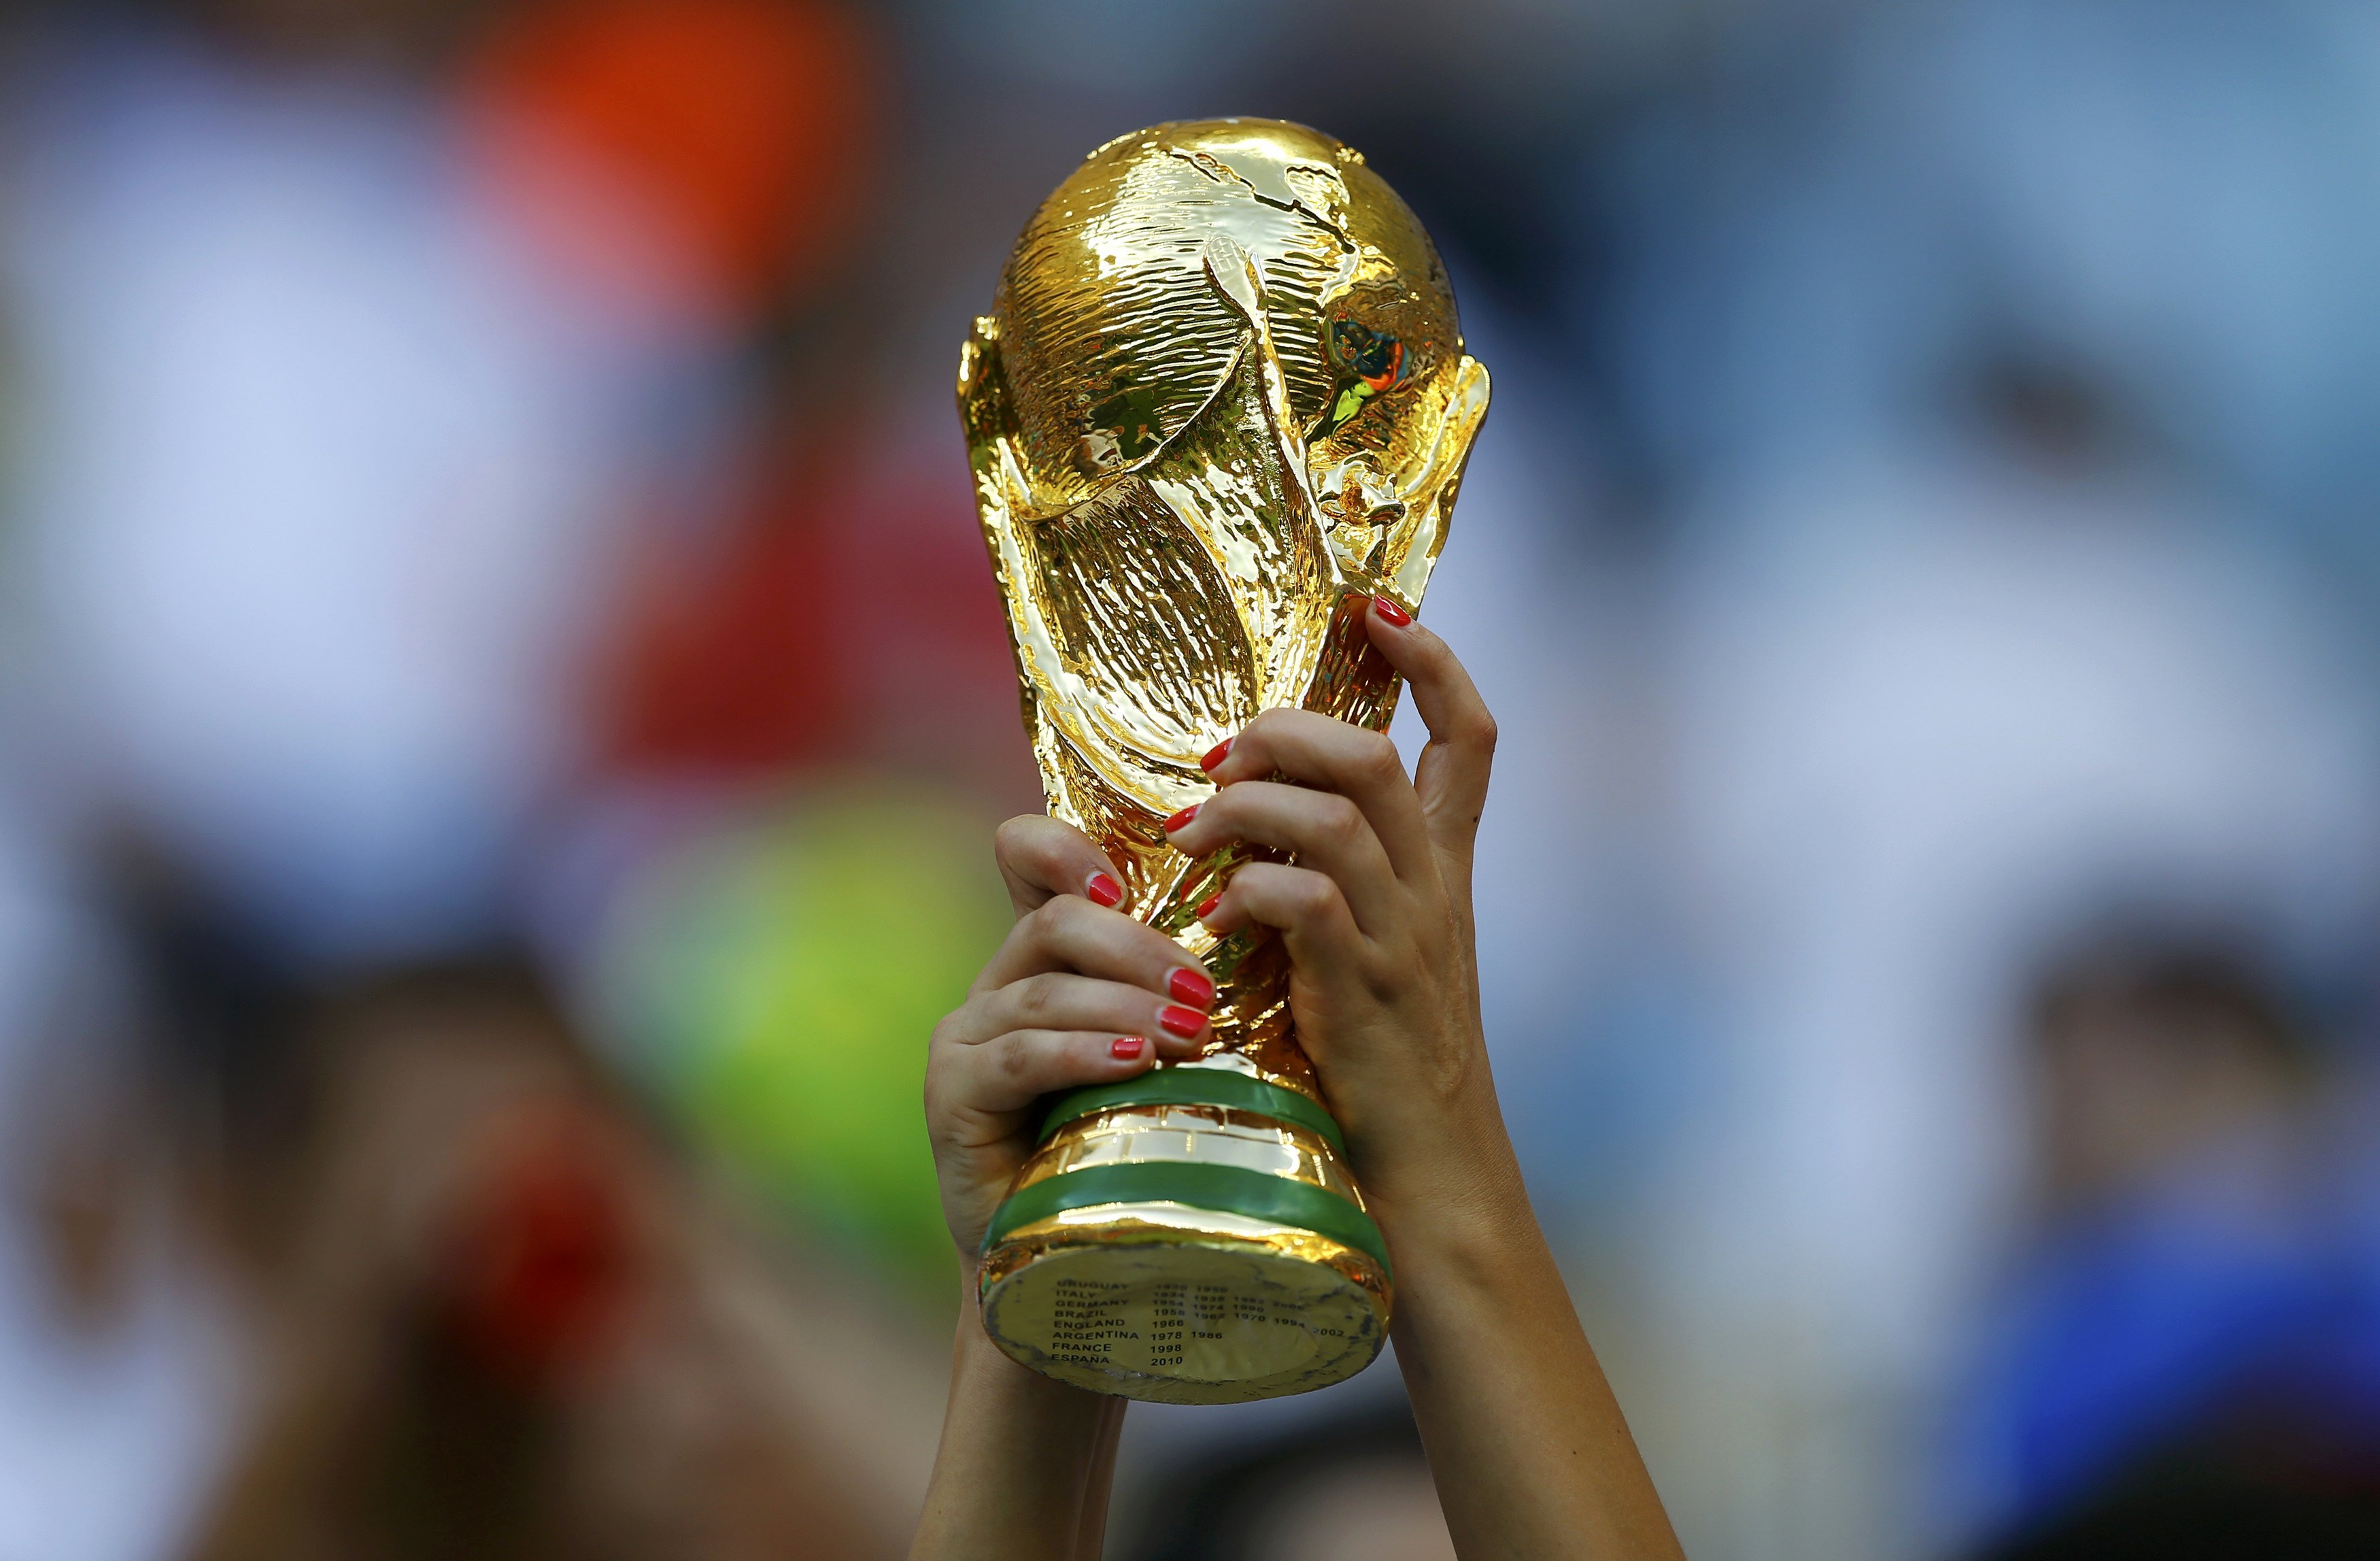 A fan holds up a trophy before the 2014 World Cup Group D soccer match between England and Italy at the Amazonia arena in Manaus on June 14, 2014.